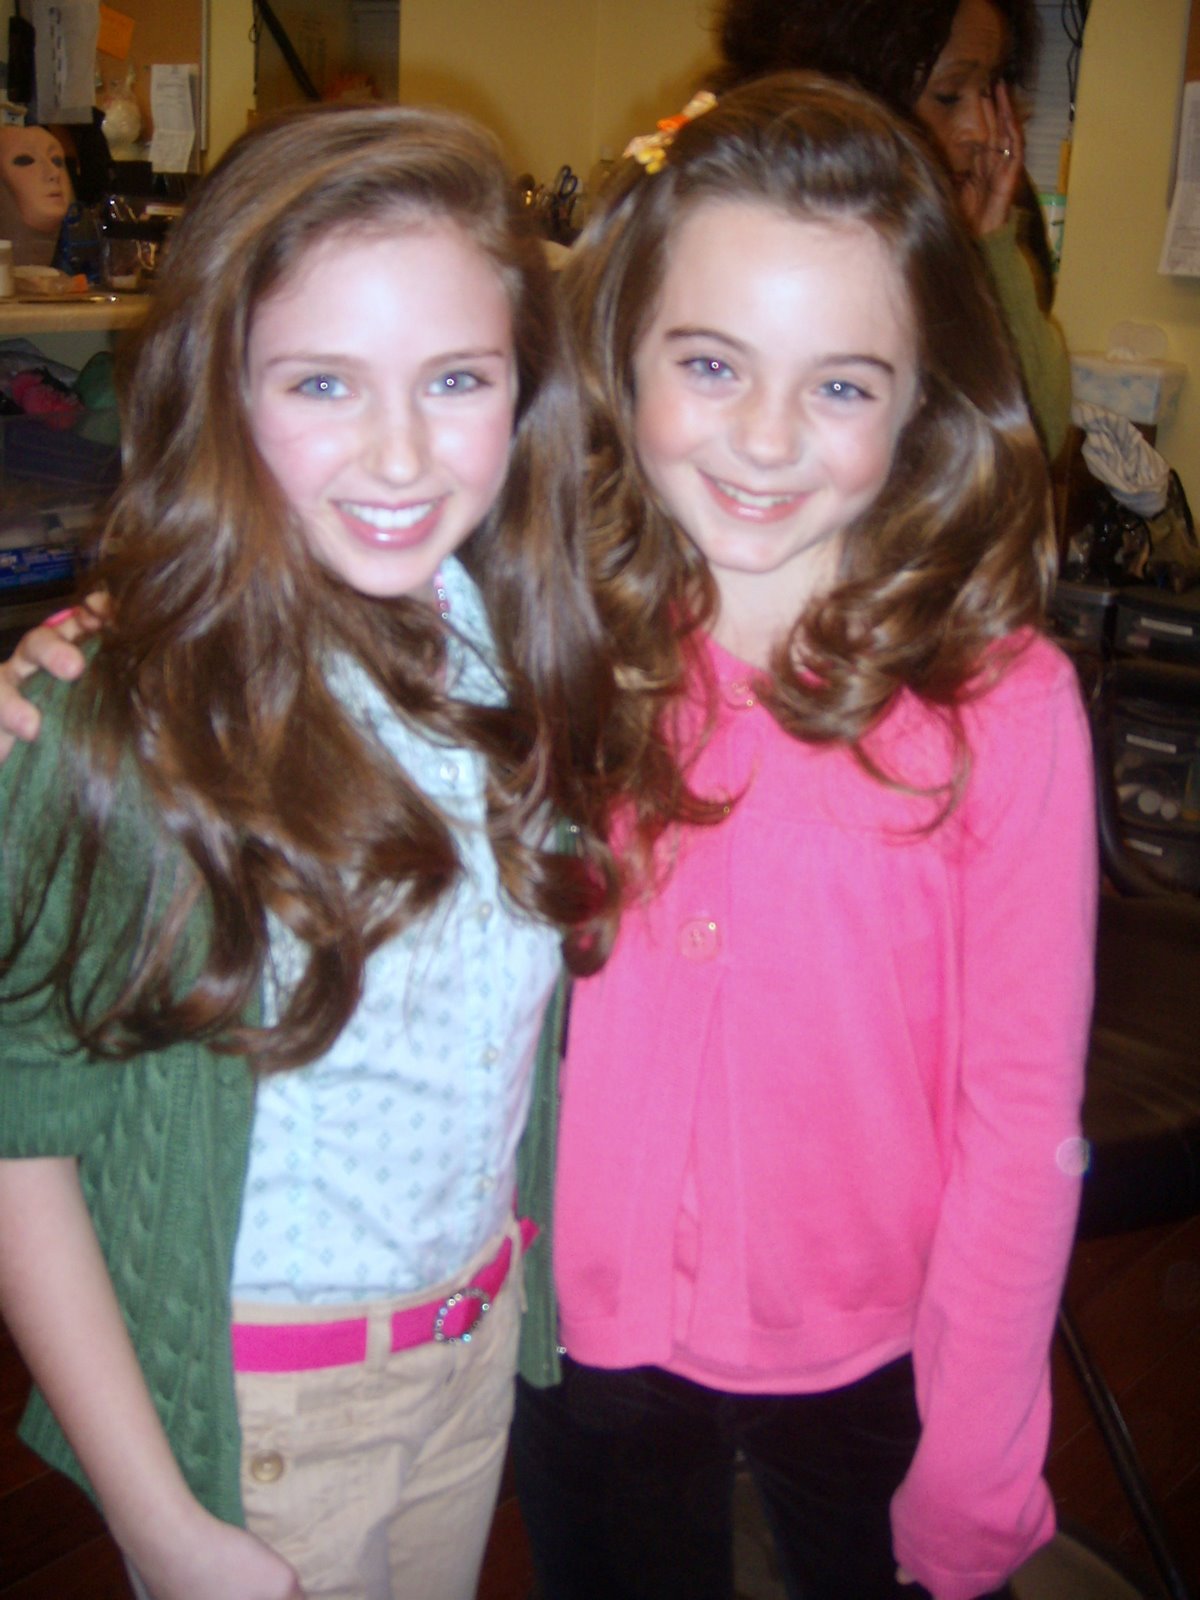 Ava with Ryan Newman from the set of 